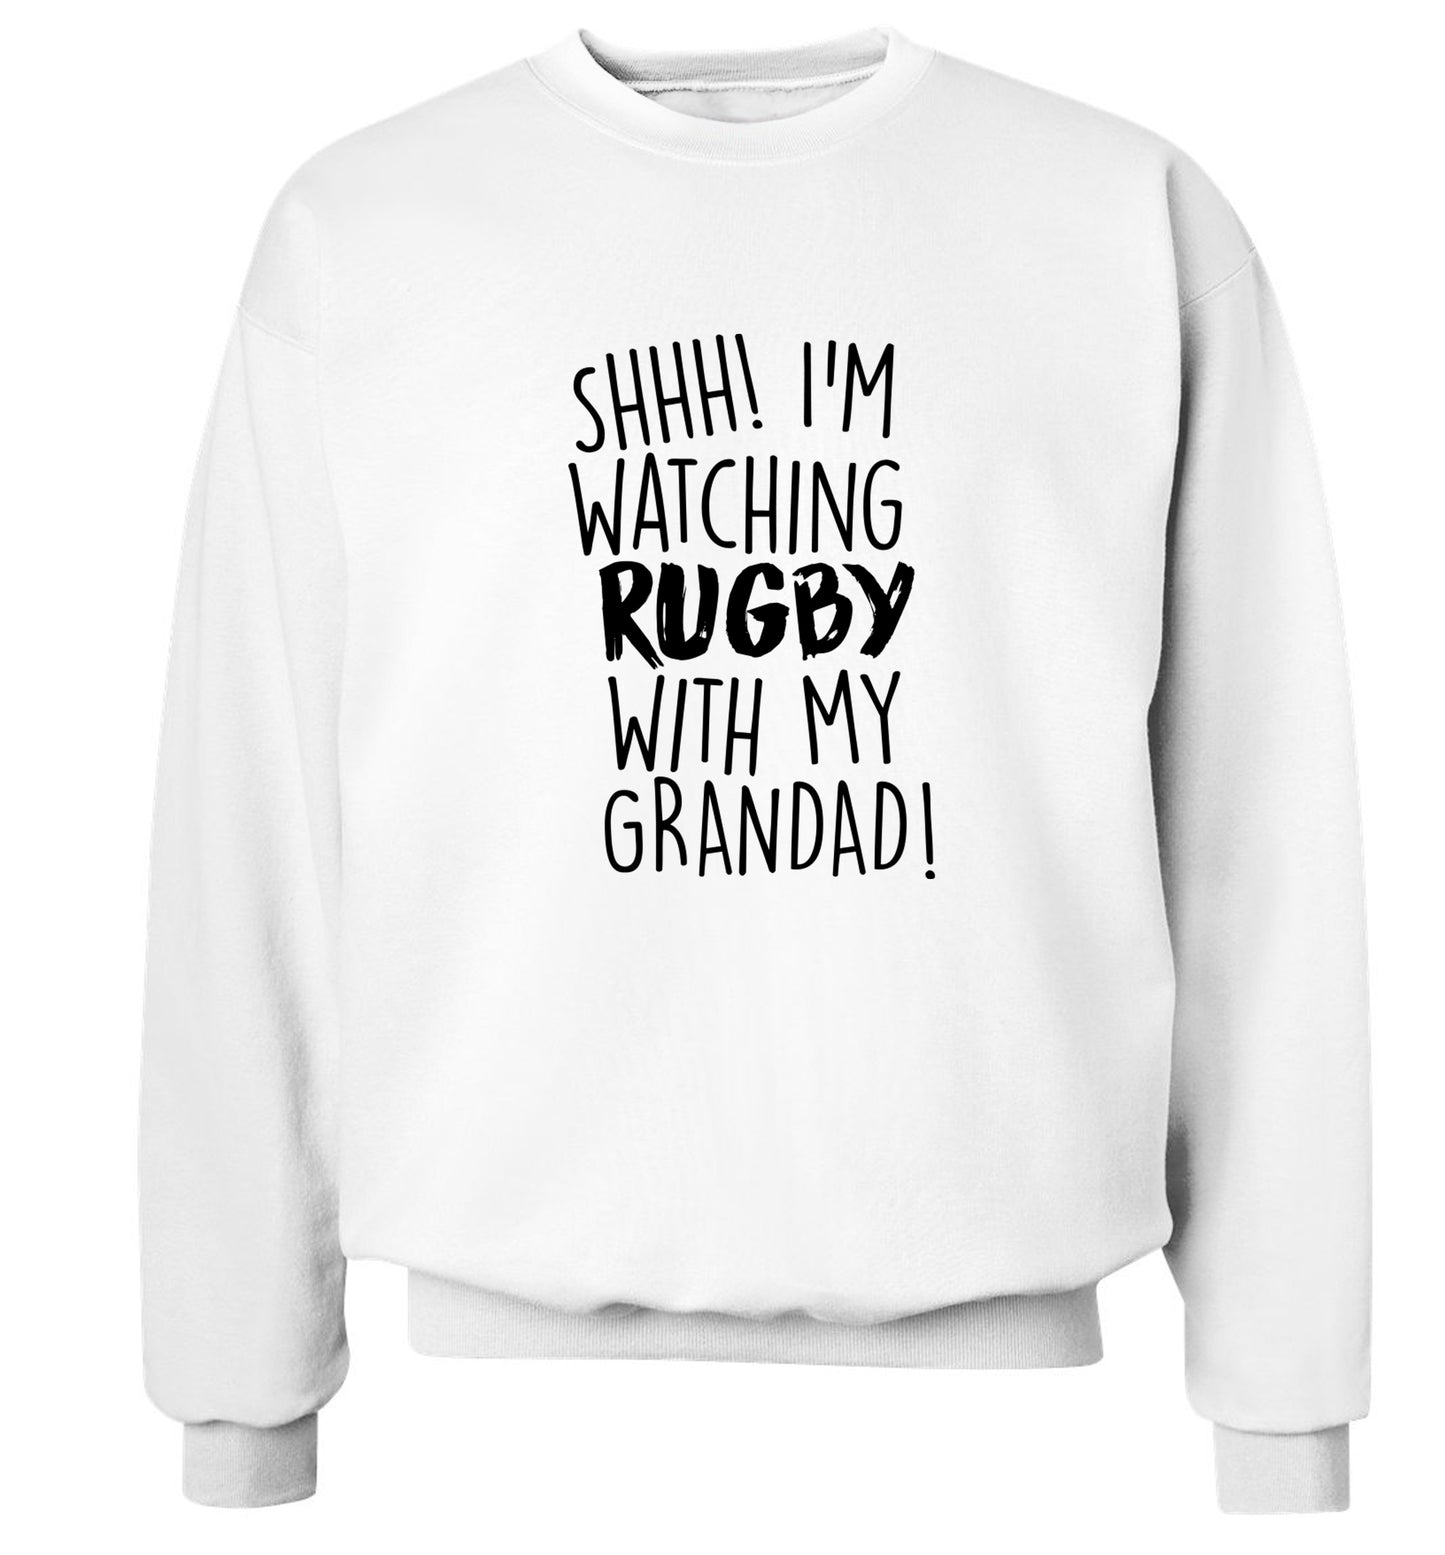 Shh I'm watching rugby with my grandaughter Adult's unisex white Sweater 2XL